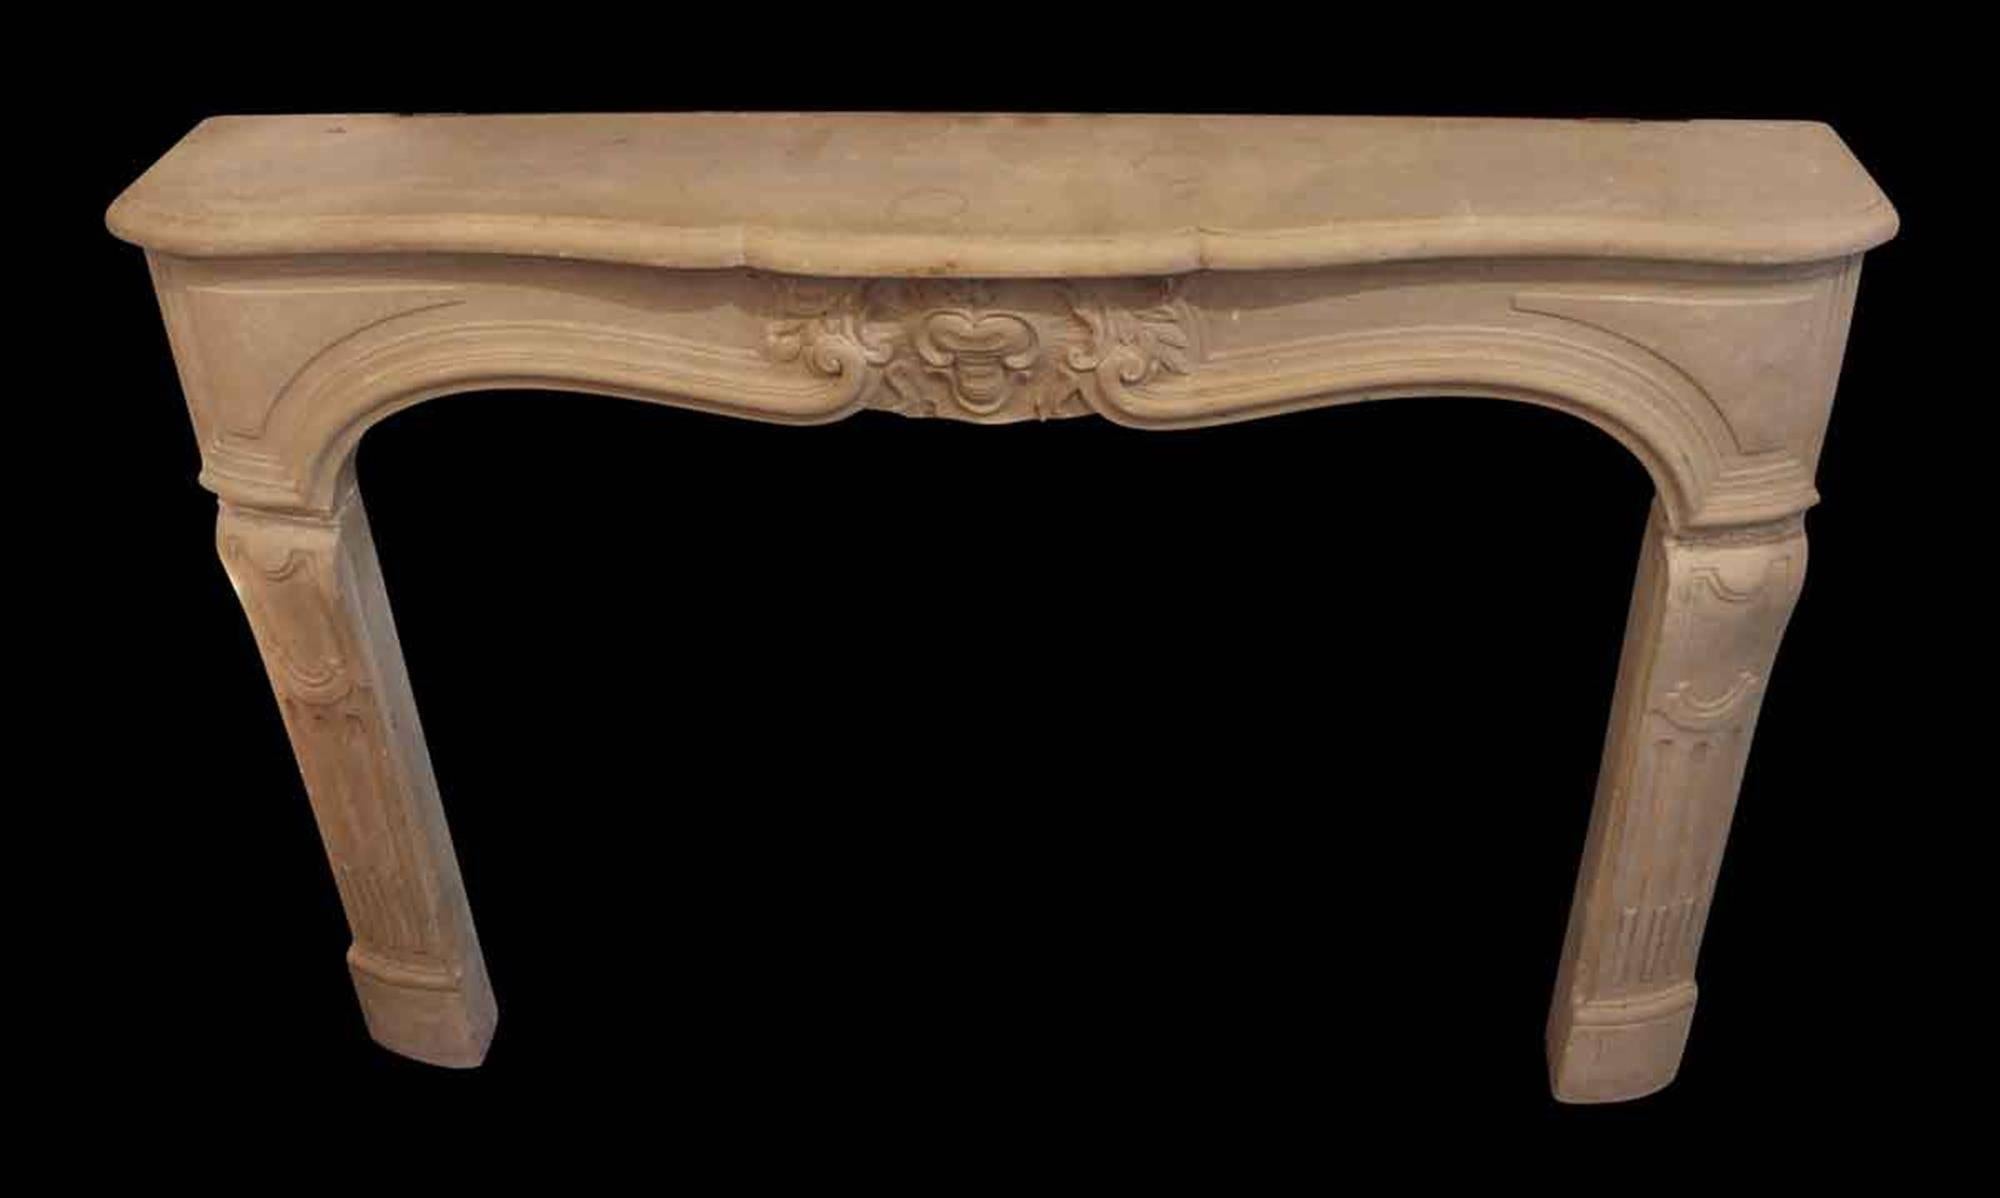 American Tan Neoclassical Style Limestone Mantel with Carved Details